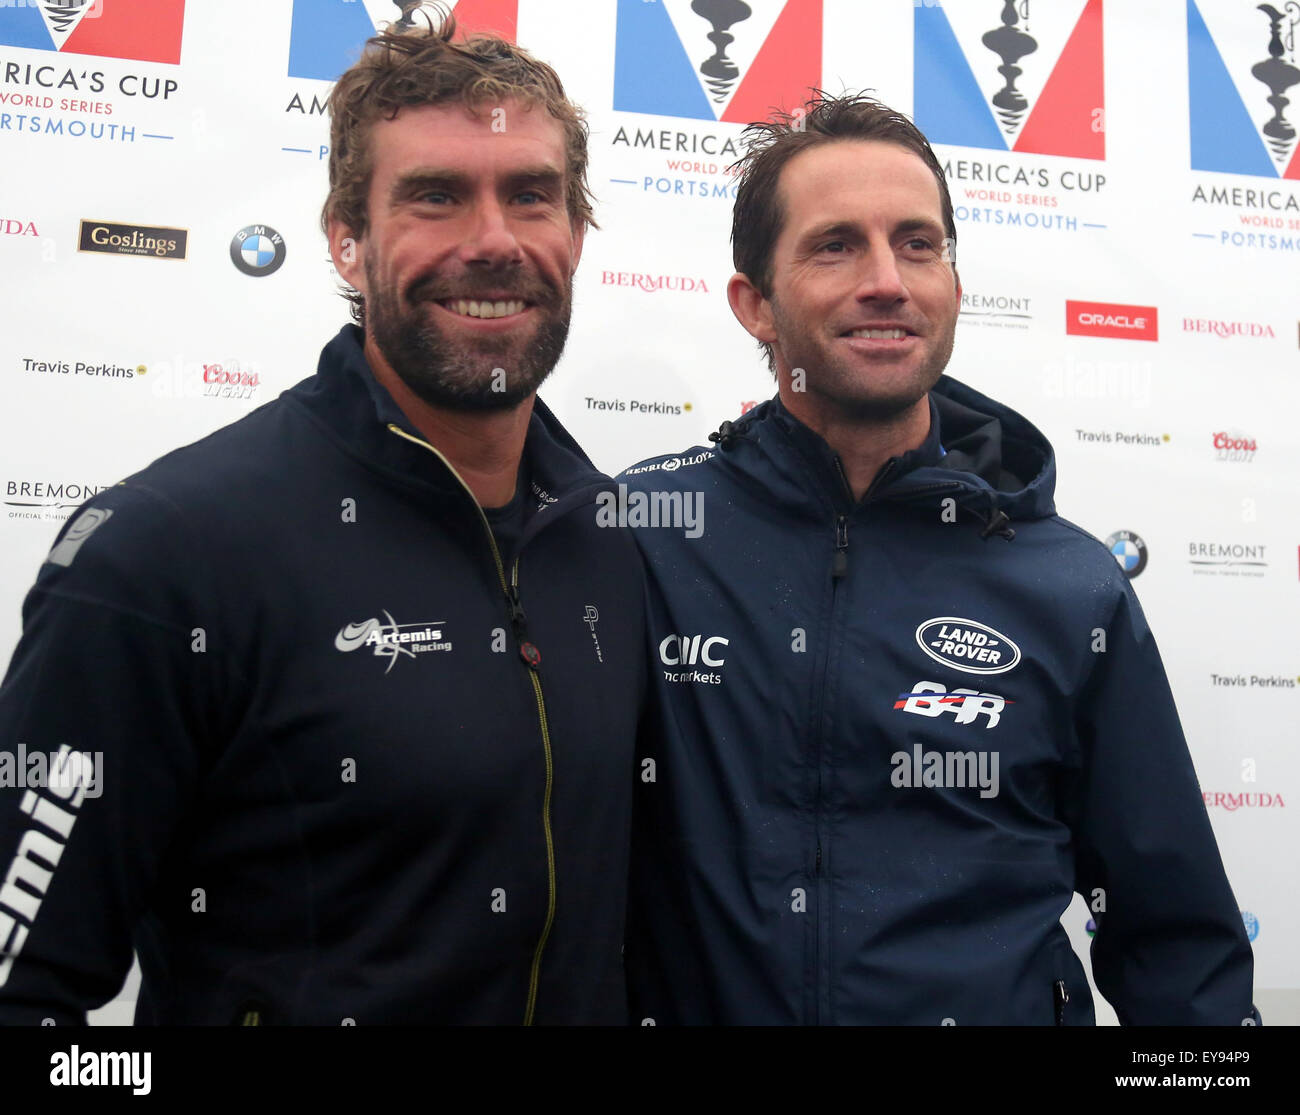 Southsea,Hampshire Friday 24  July 2015.   America Cup on Southsea Common Artemis Racing Skipper: Nathan Outteridge ,BAR – Ben Ainslie Racing   Ben Puts a BAR Landrover hat on Nathan  Daily Press conference   © uknip/ Alamy Live News Credit:  uknip/ Alamy Live News Stock Photo